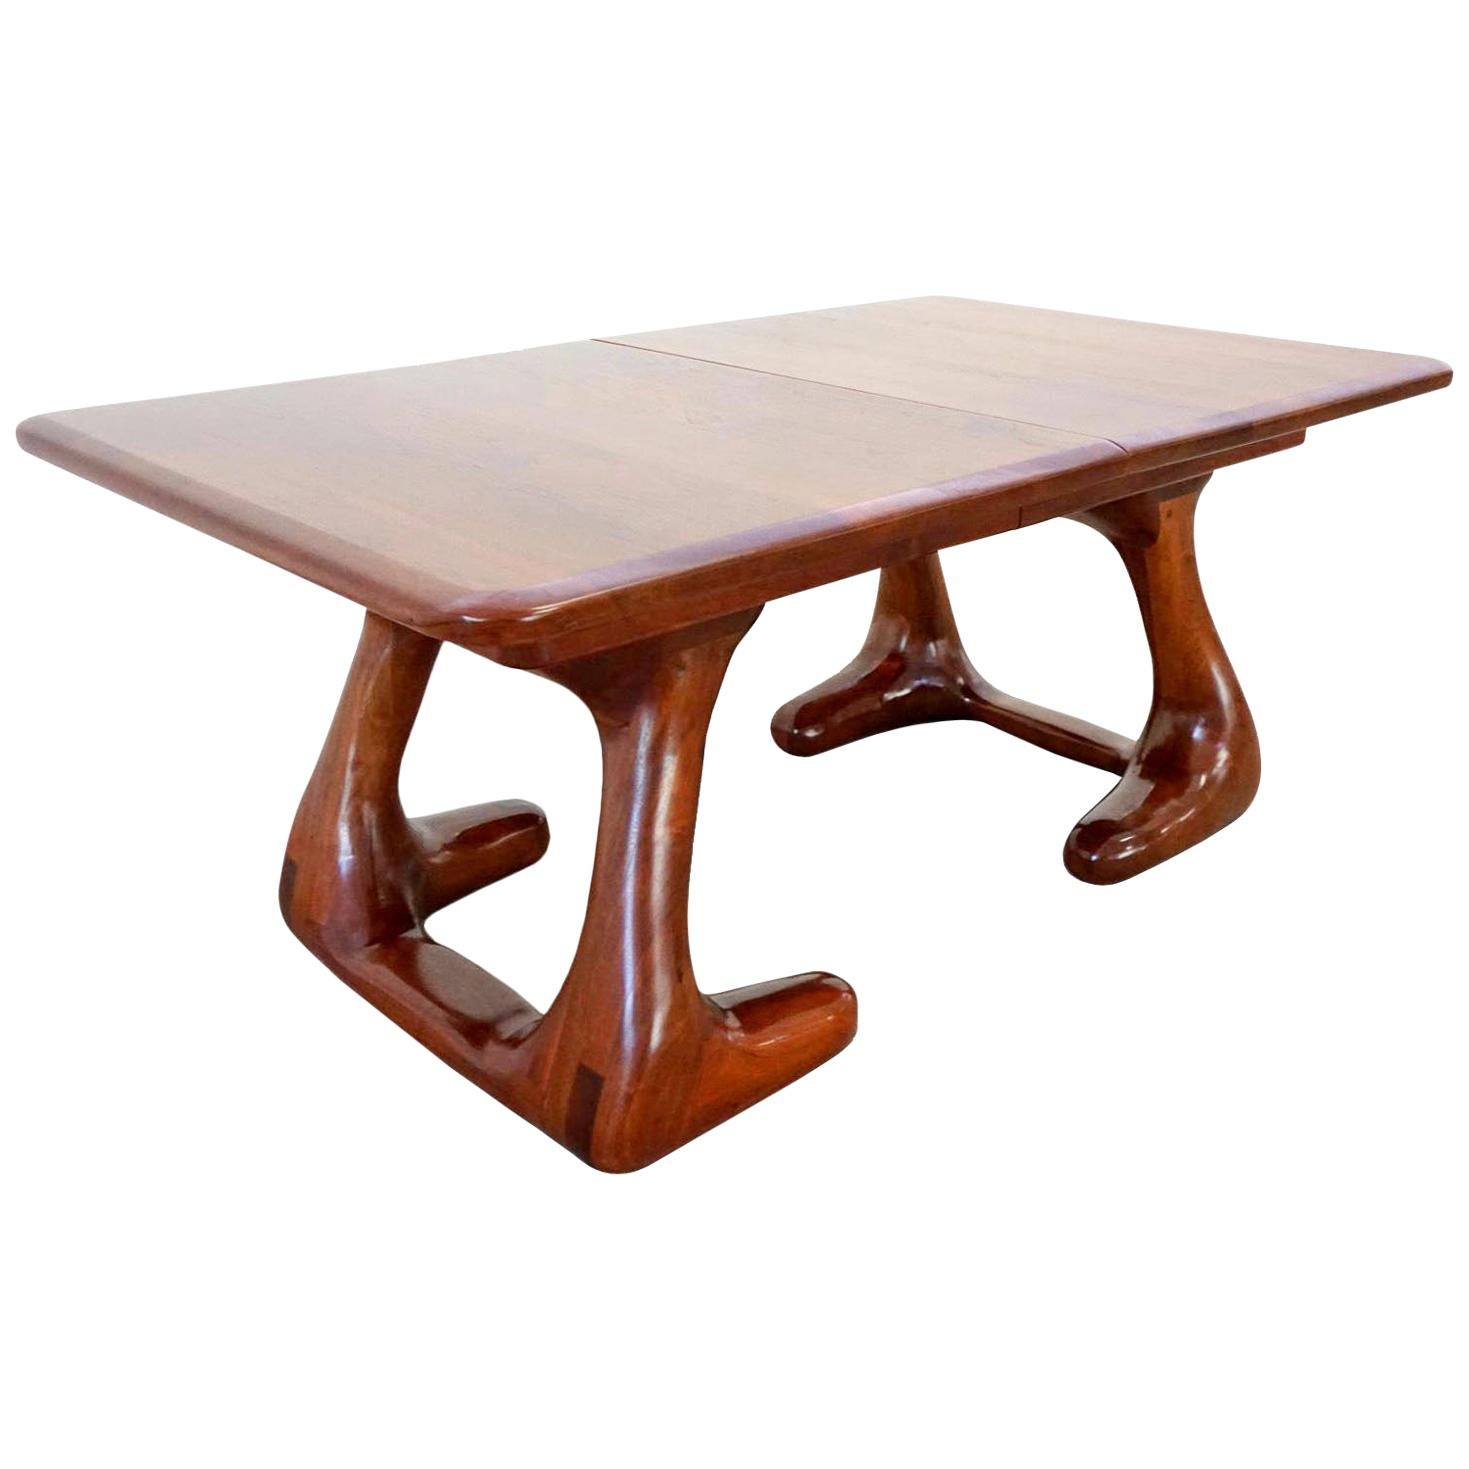 Mid-Century Modern American Studio Craft Wood Dining Table Wendell Castle Style